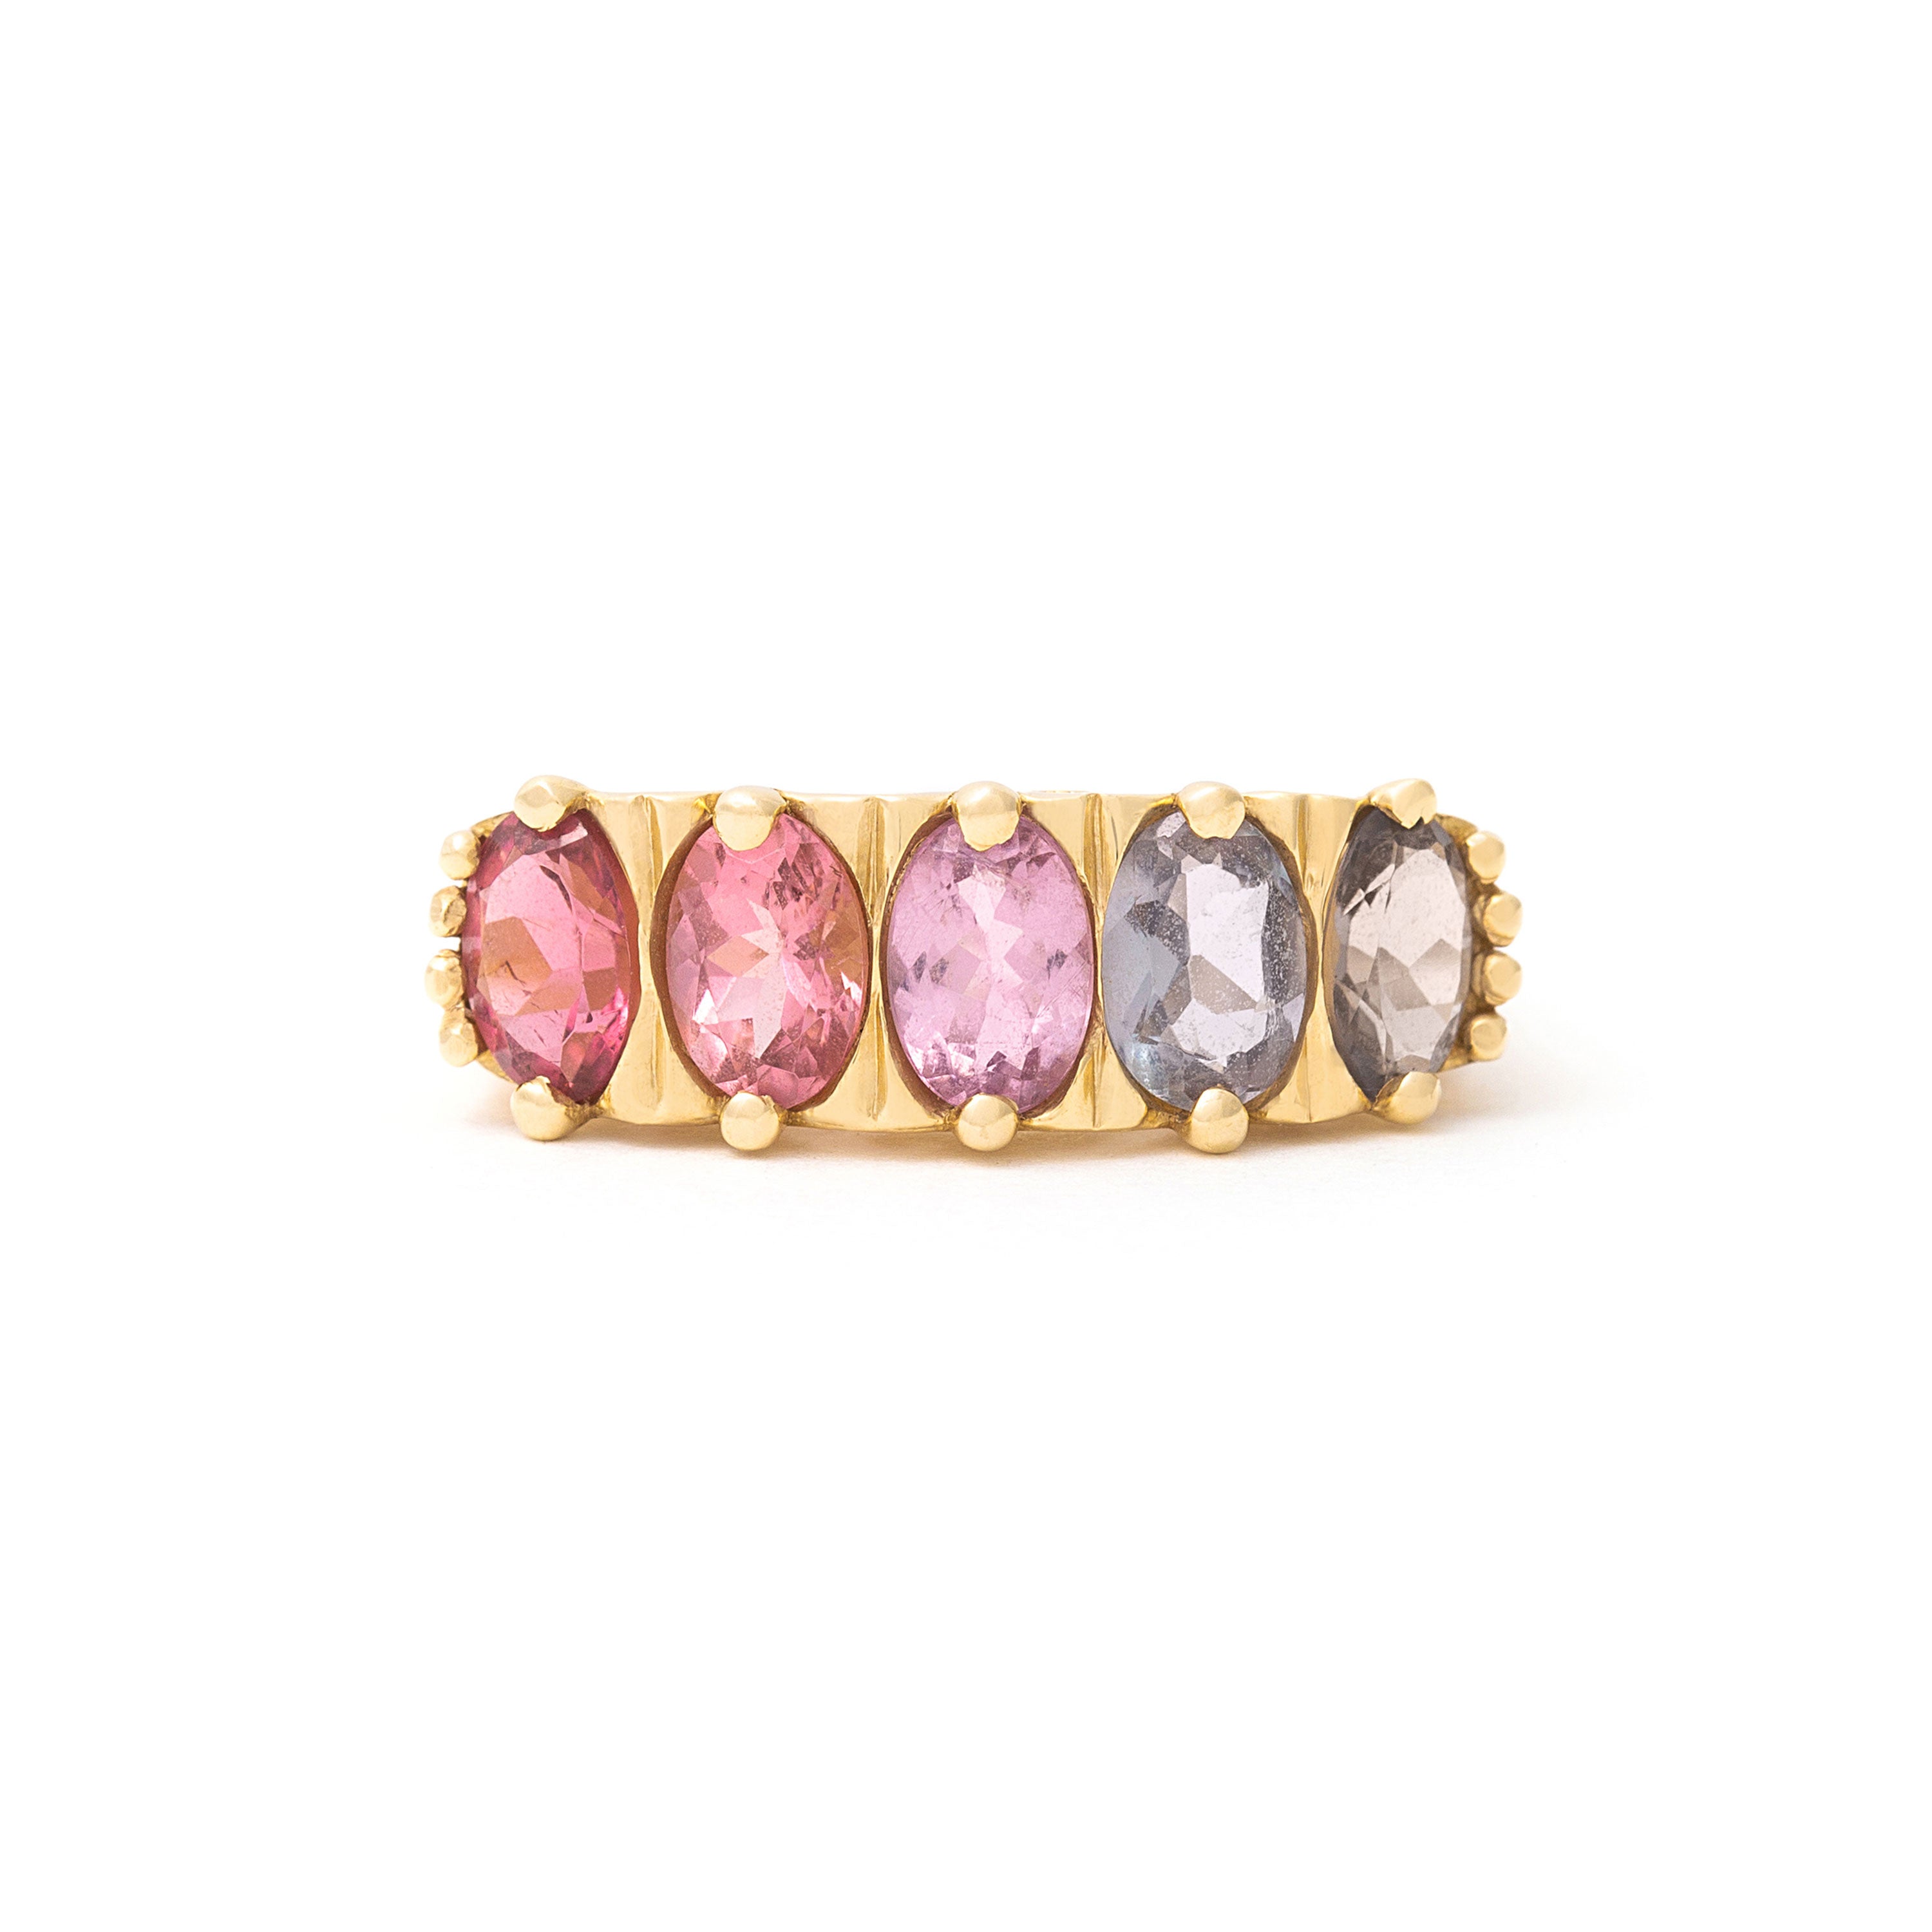 The F&B Dusty Rose Ombre Ring